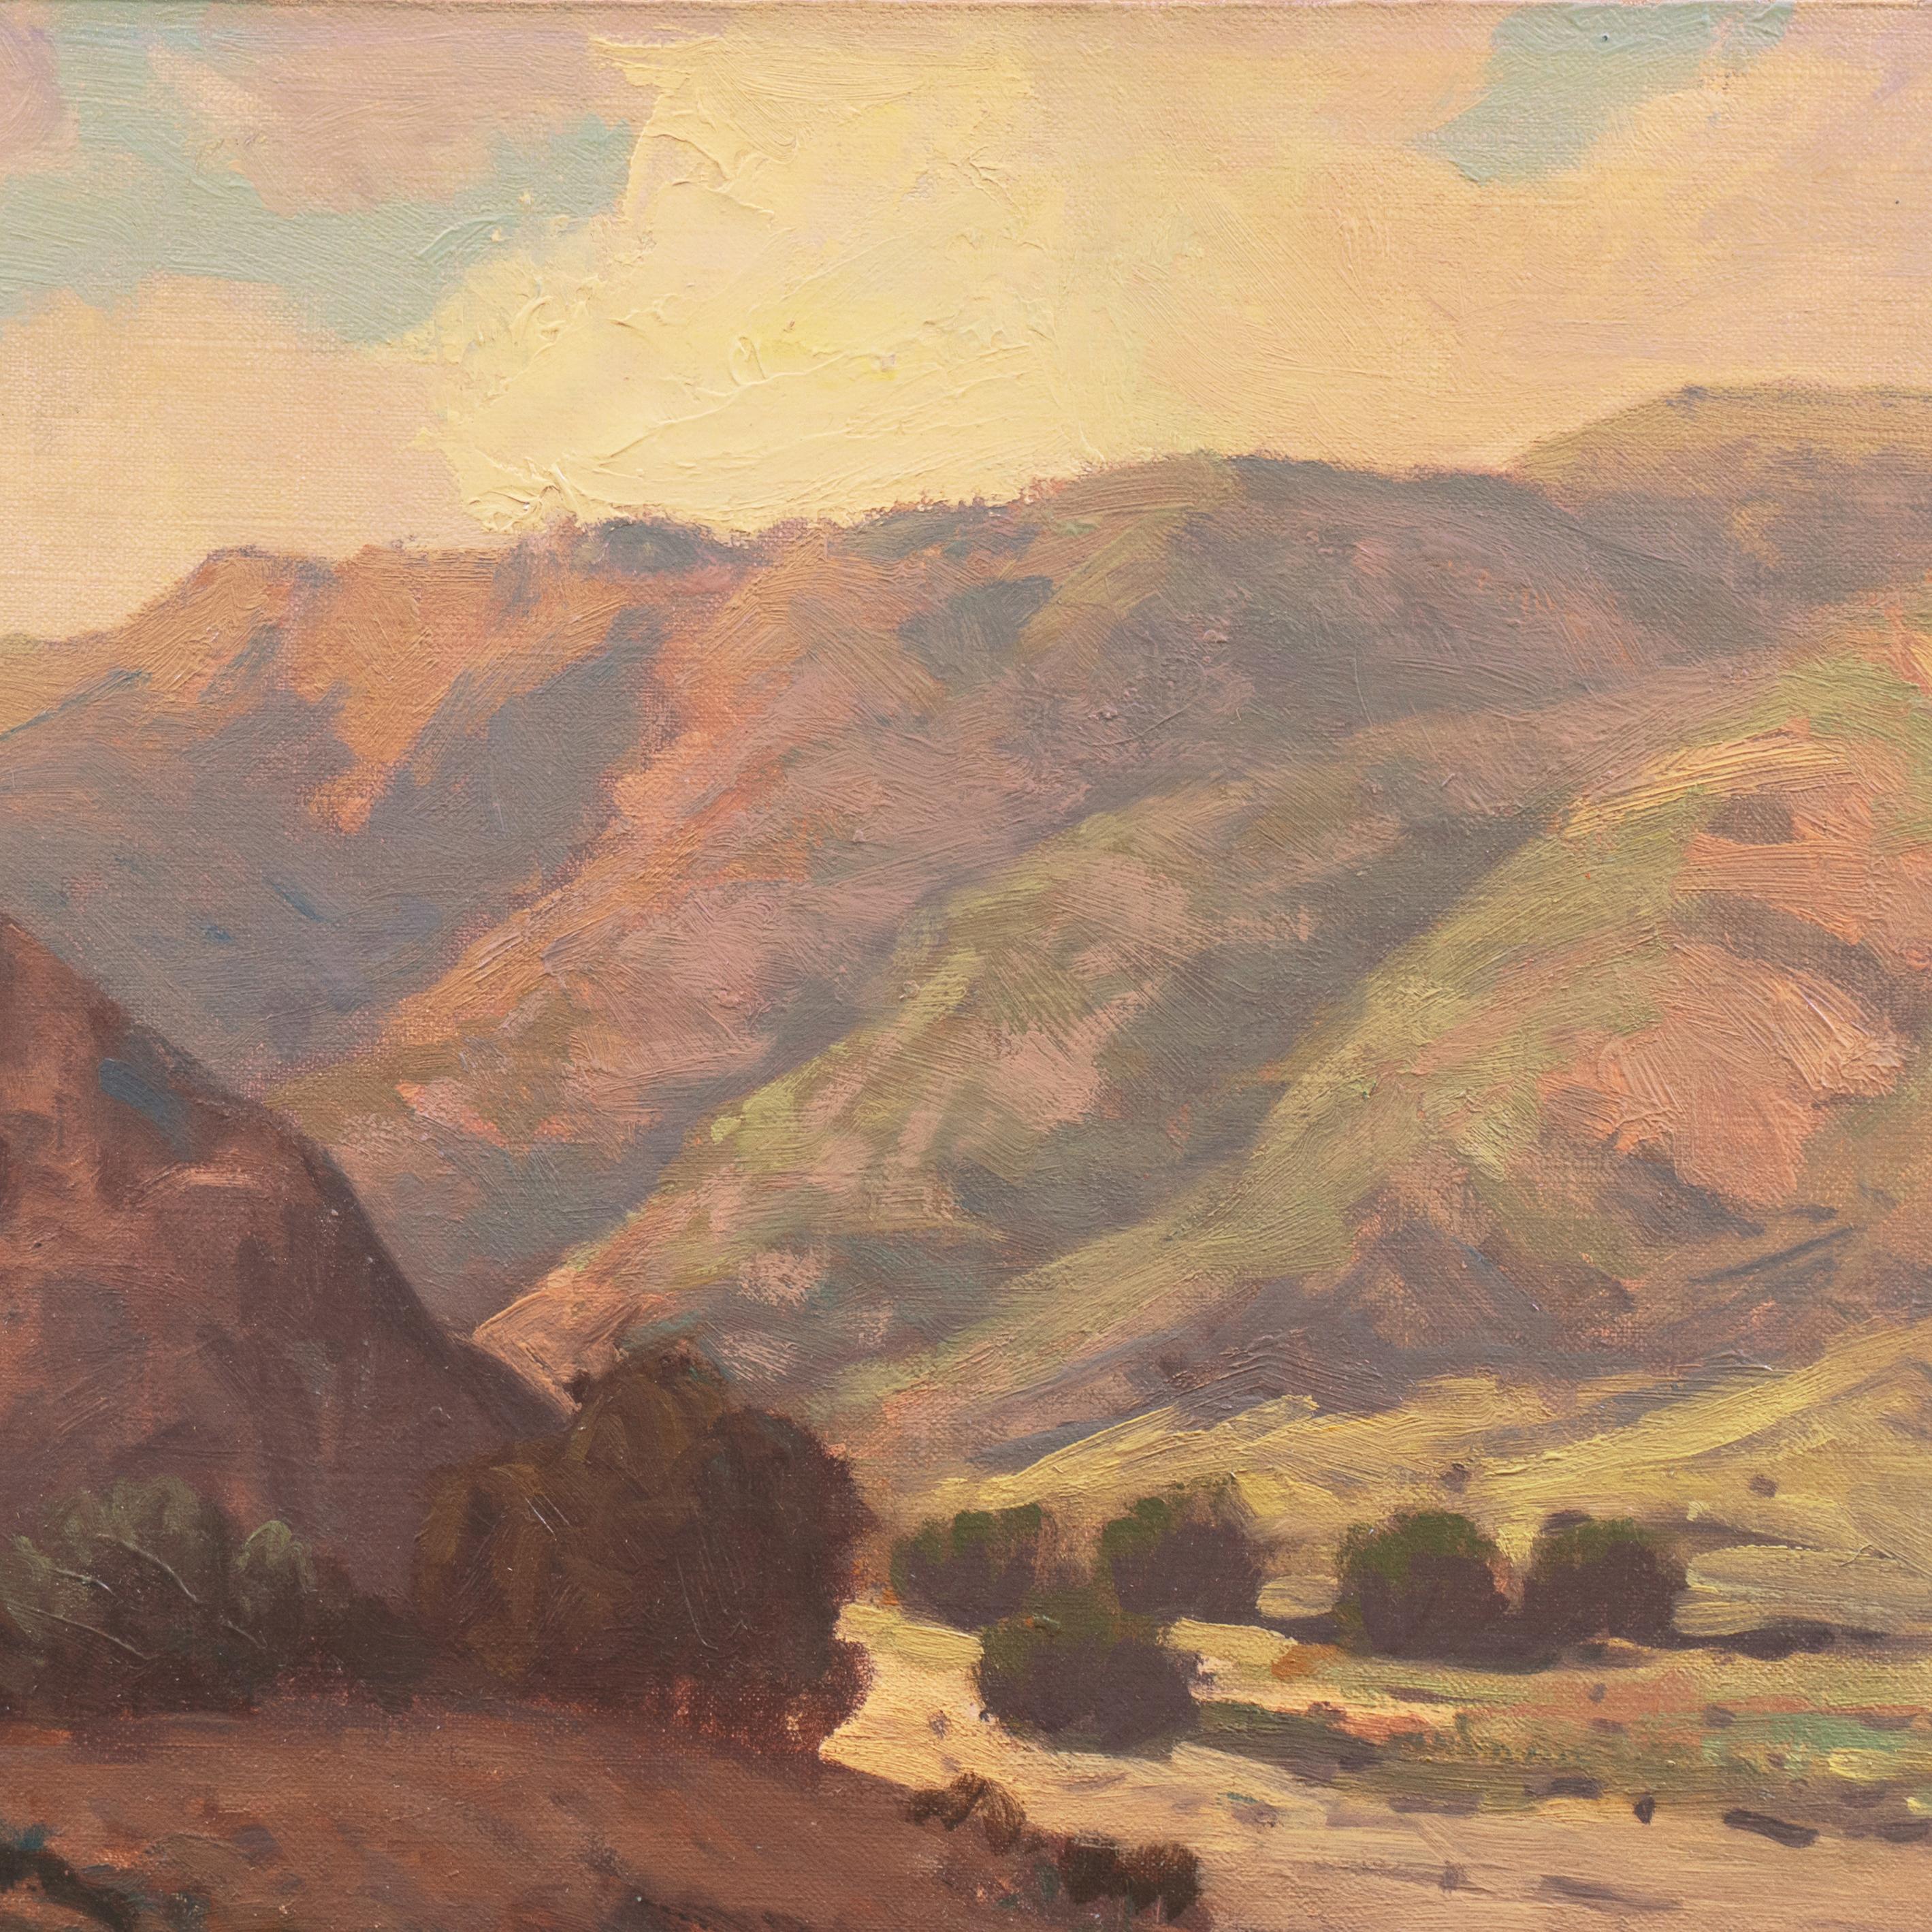 Signed lower right, 'Wm. P. Krehm' for William Krehm (American, 1901-1968) and painted circa 1940.

A period oil painting showing a mountainous, desert landscape at dusk, most likely a view of a Santa Ana River tributary in Southern California's